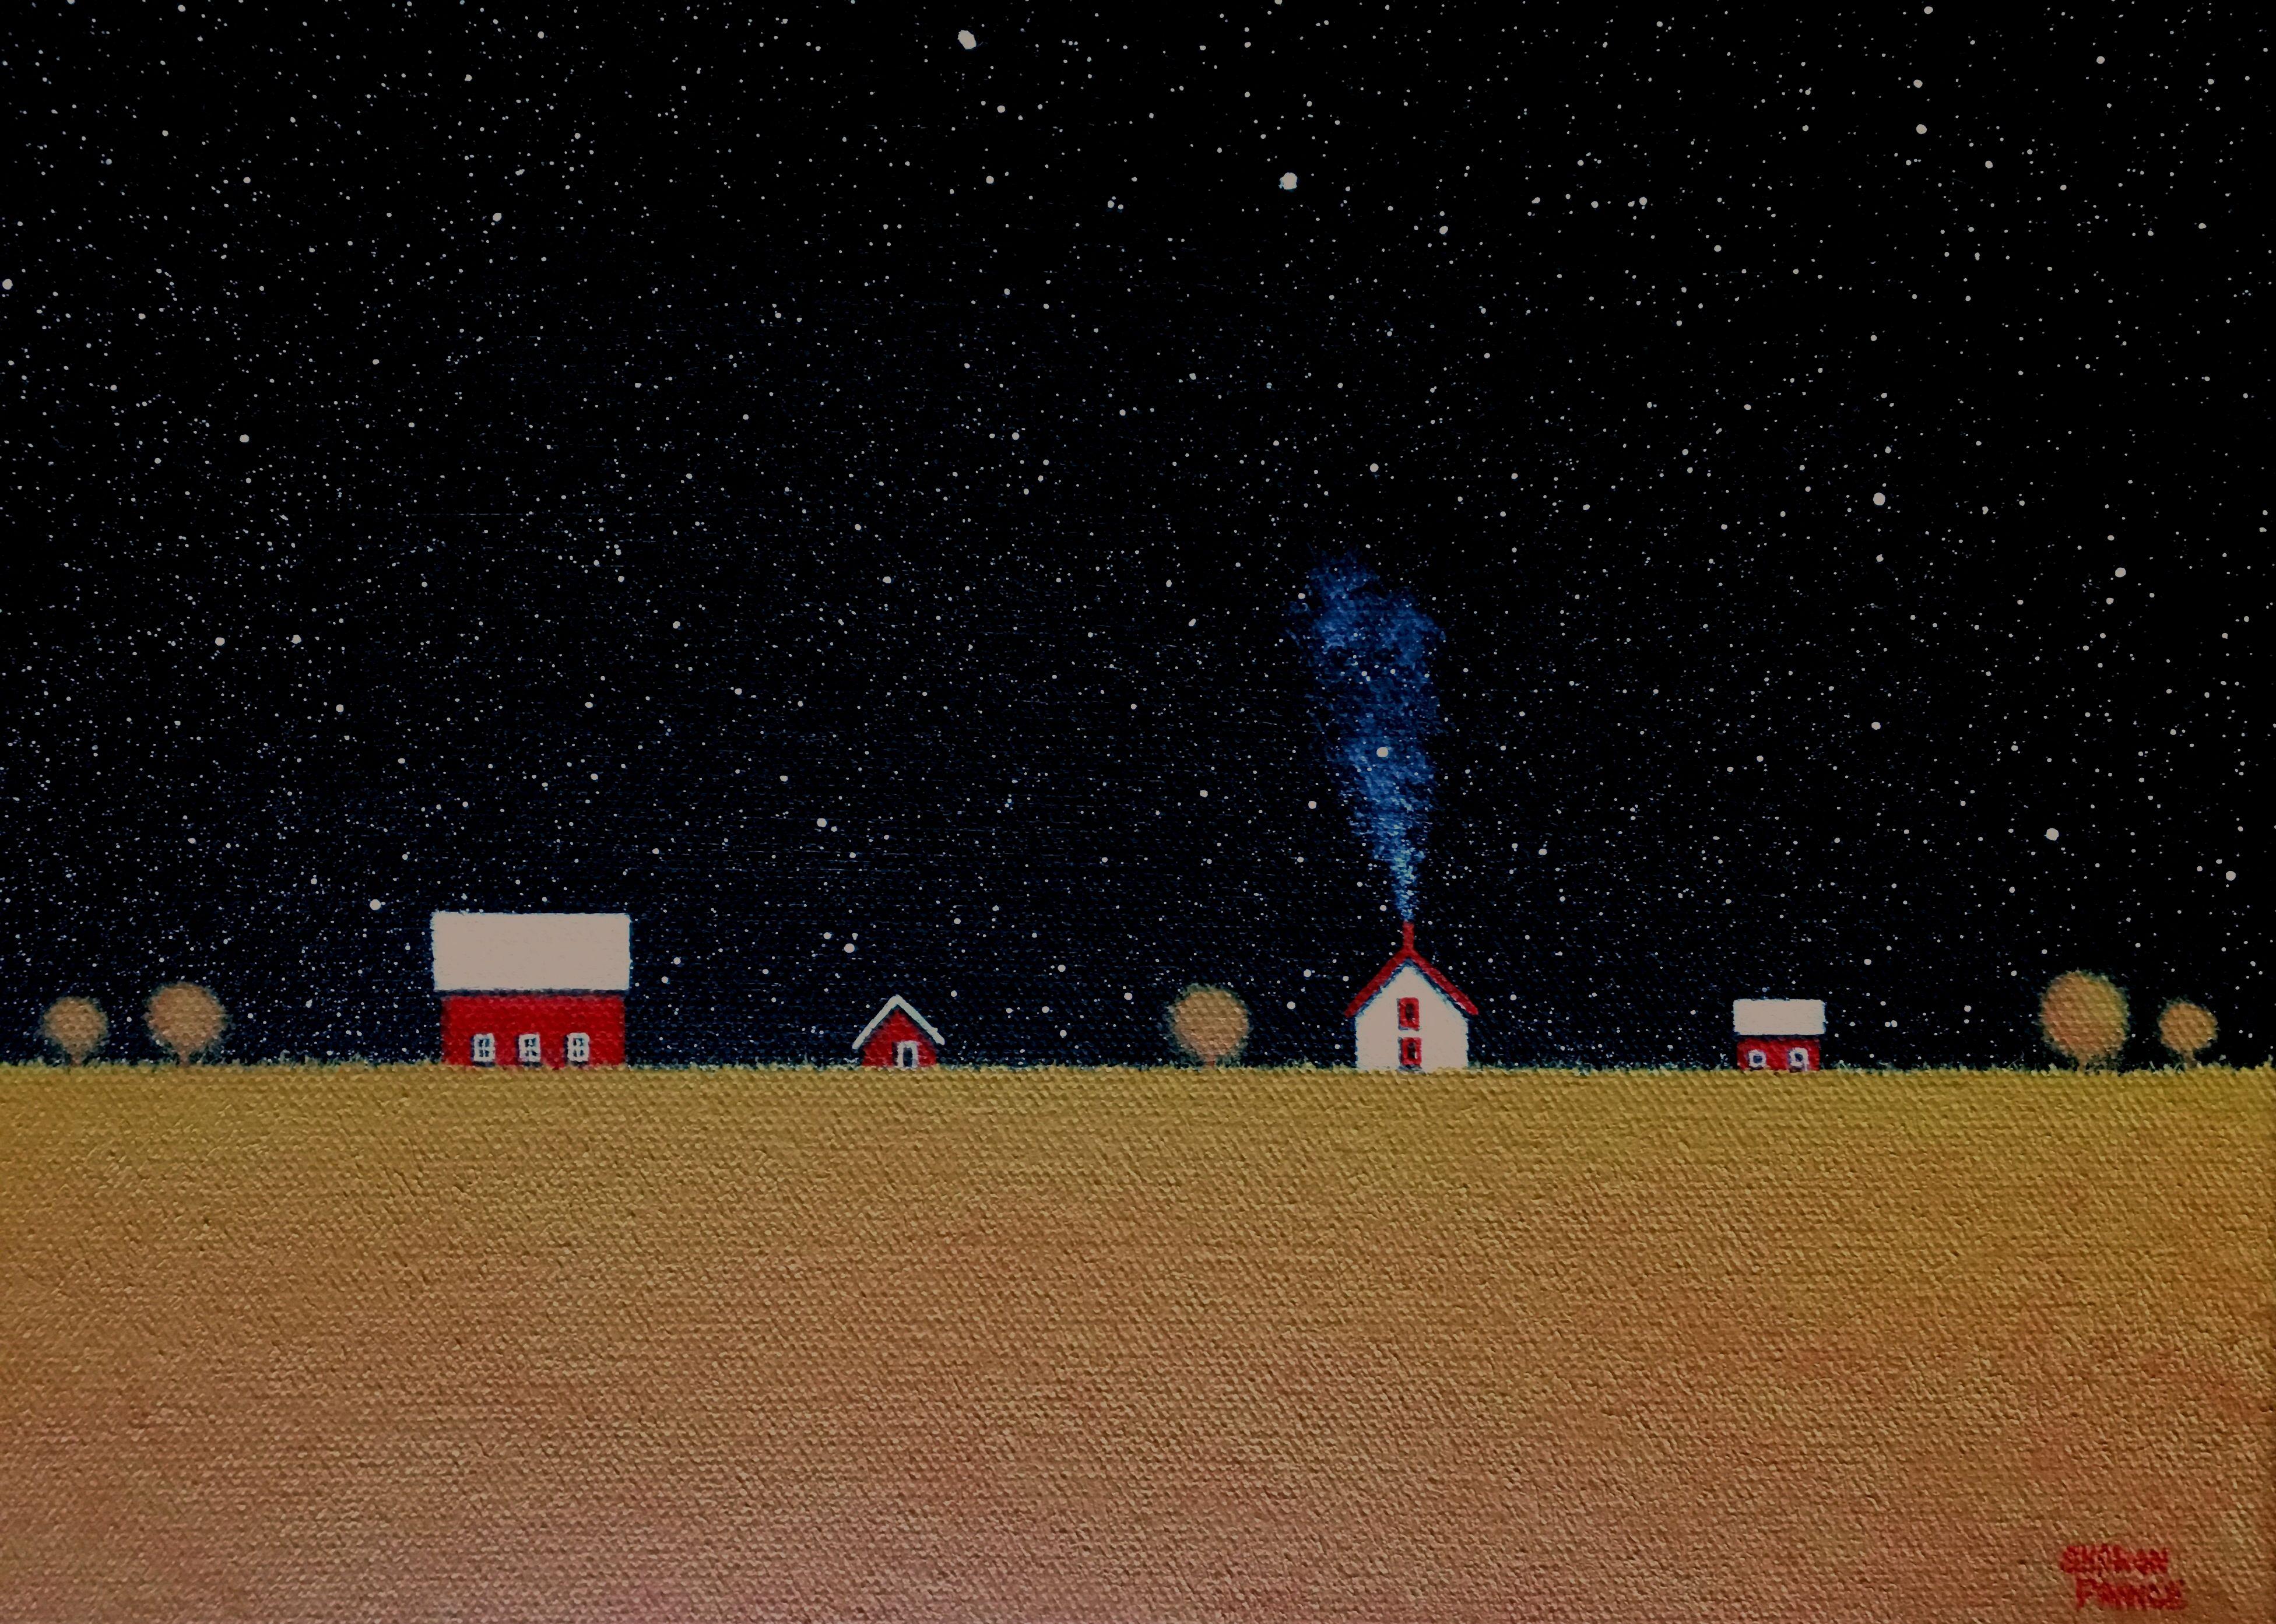 This painting is the 15th in a series of Big Dipper paintings that Sharon has been working on.  Sharon paints her minimal views of an old farmstead on a quiet summers night, where the big open sky is full of stars and the big dipper is overhead. 